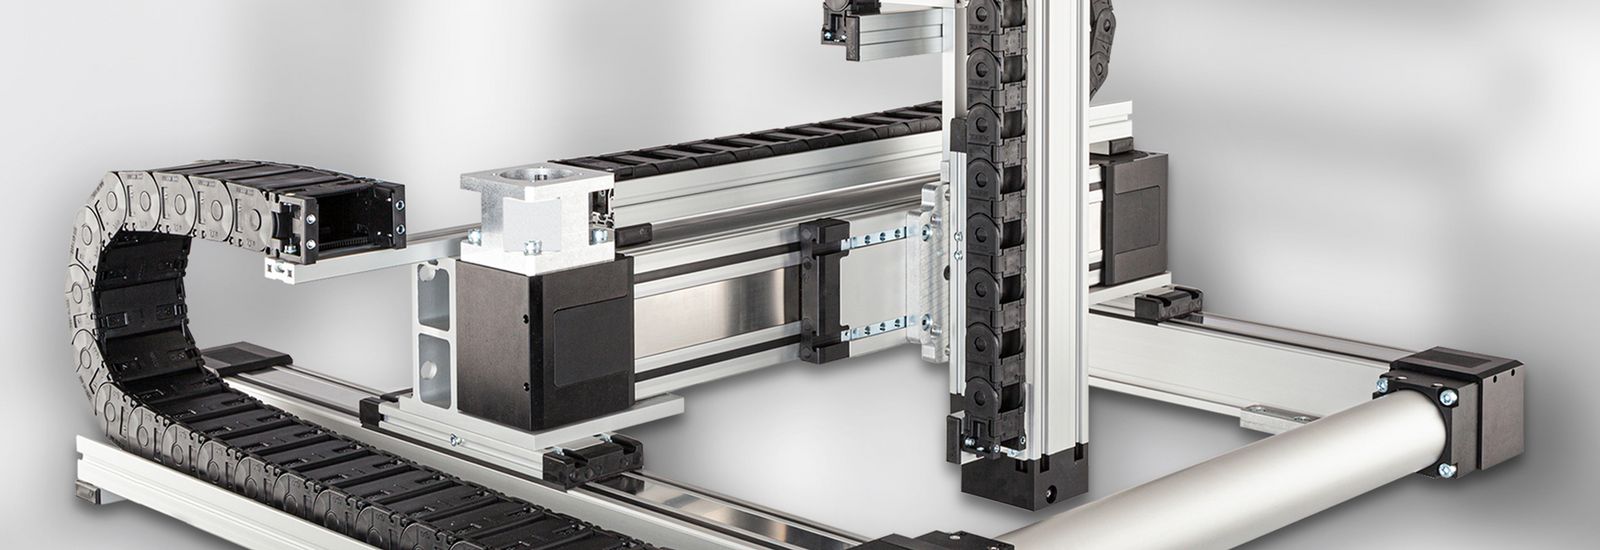 Multi-axis modular system: implementing gantry systems quickly and simply